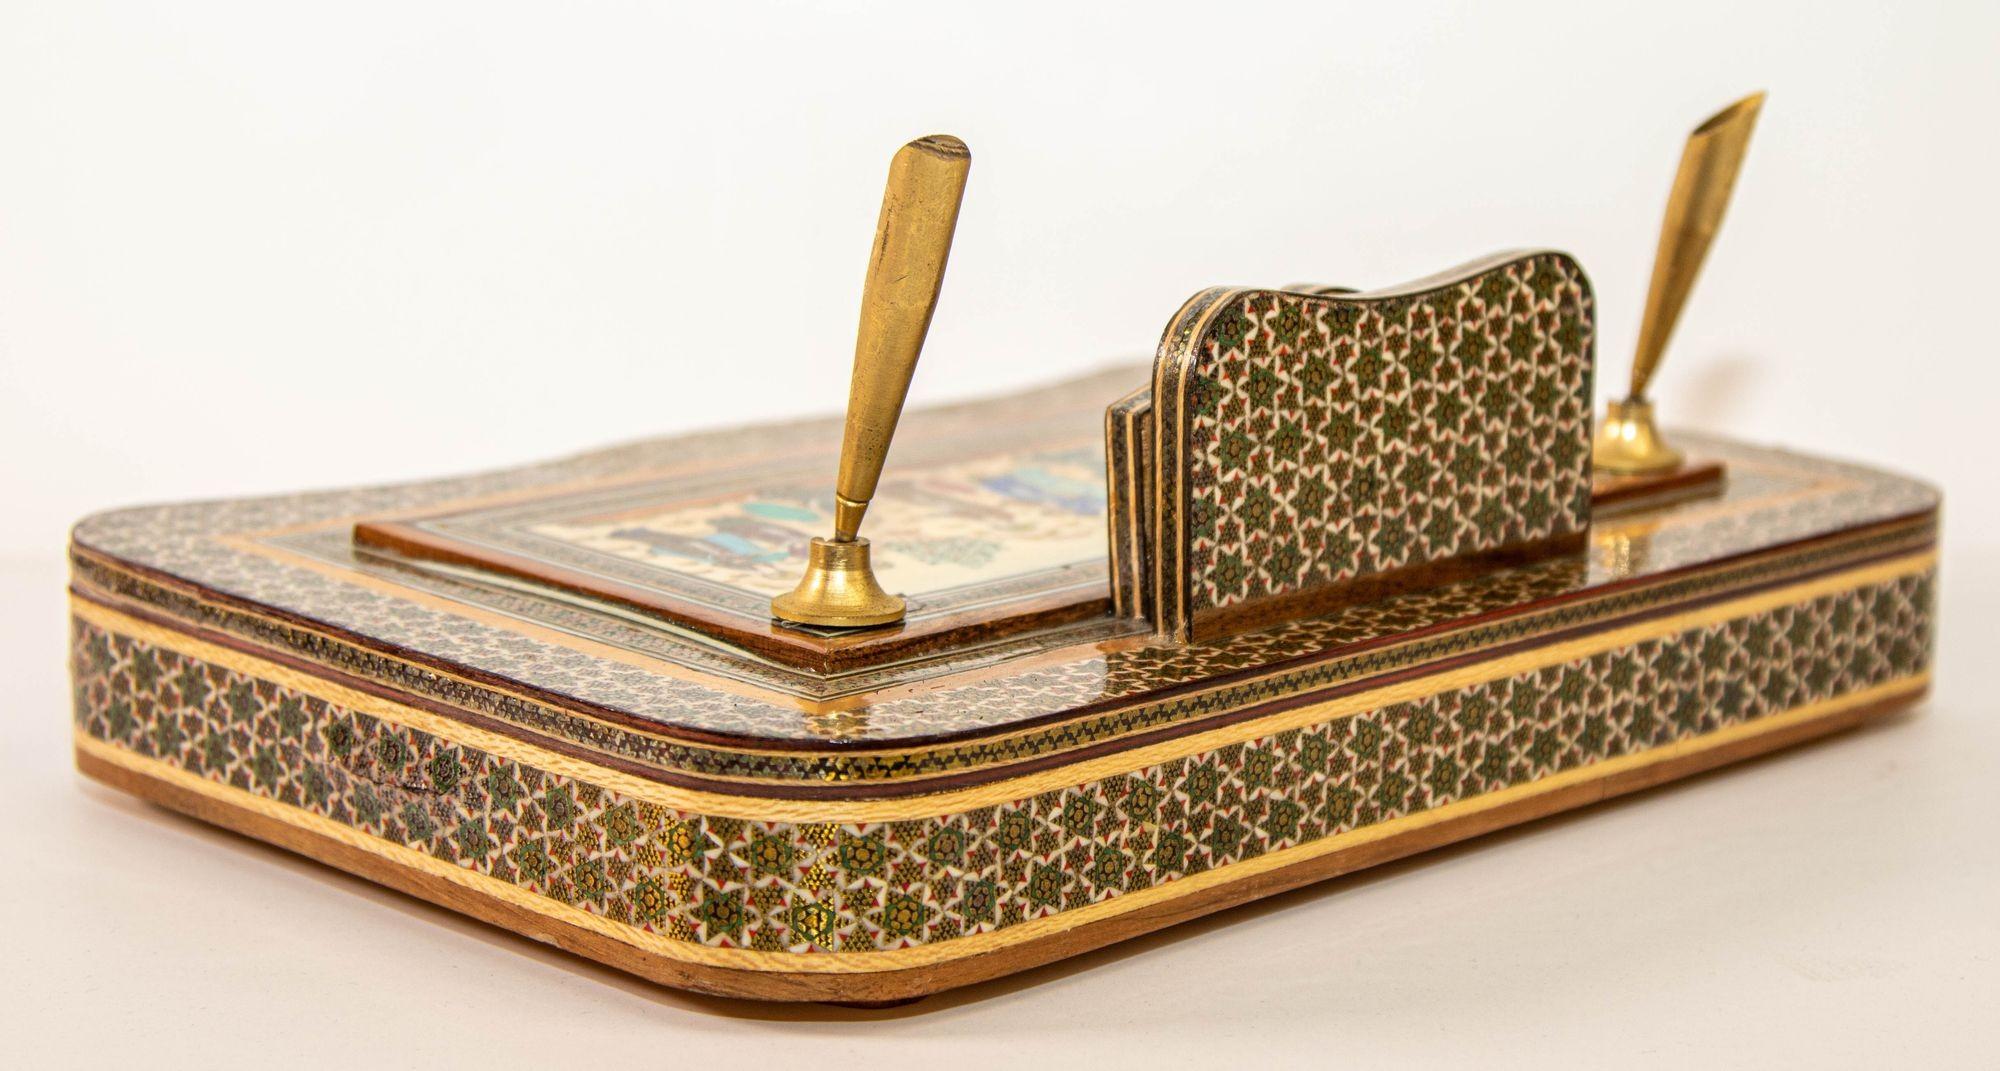 Vintage 1950s Persian Khatam Hand Painted Pen and Letter Desk Set In Good Condition For Sale In North Hollywood, CA